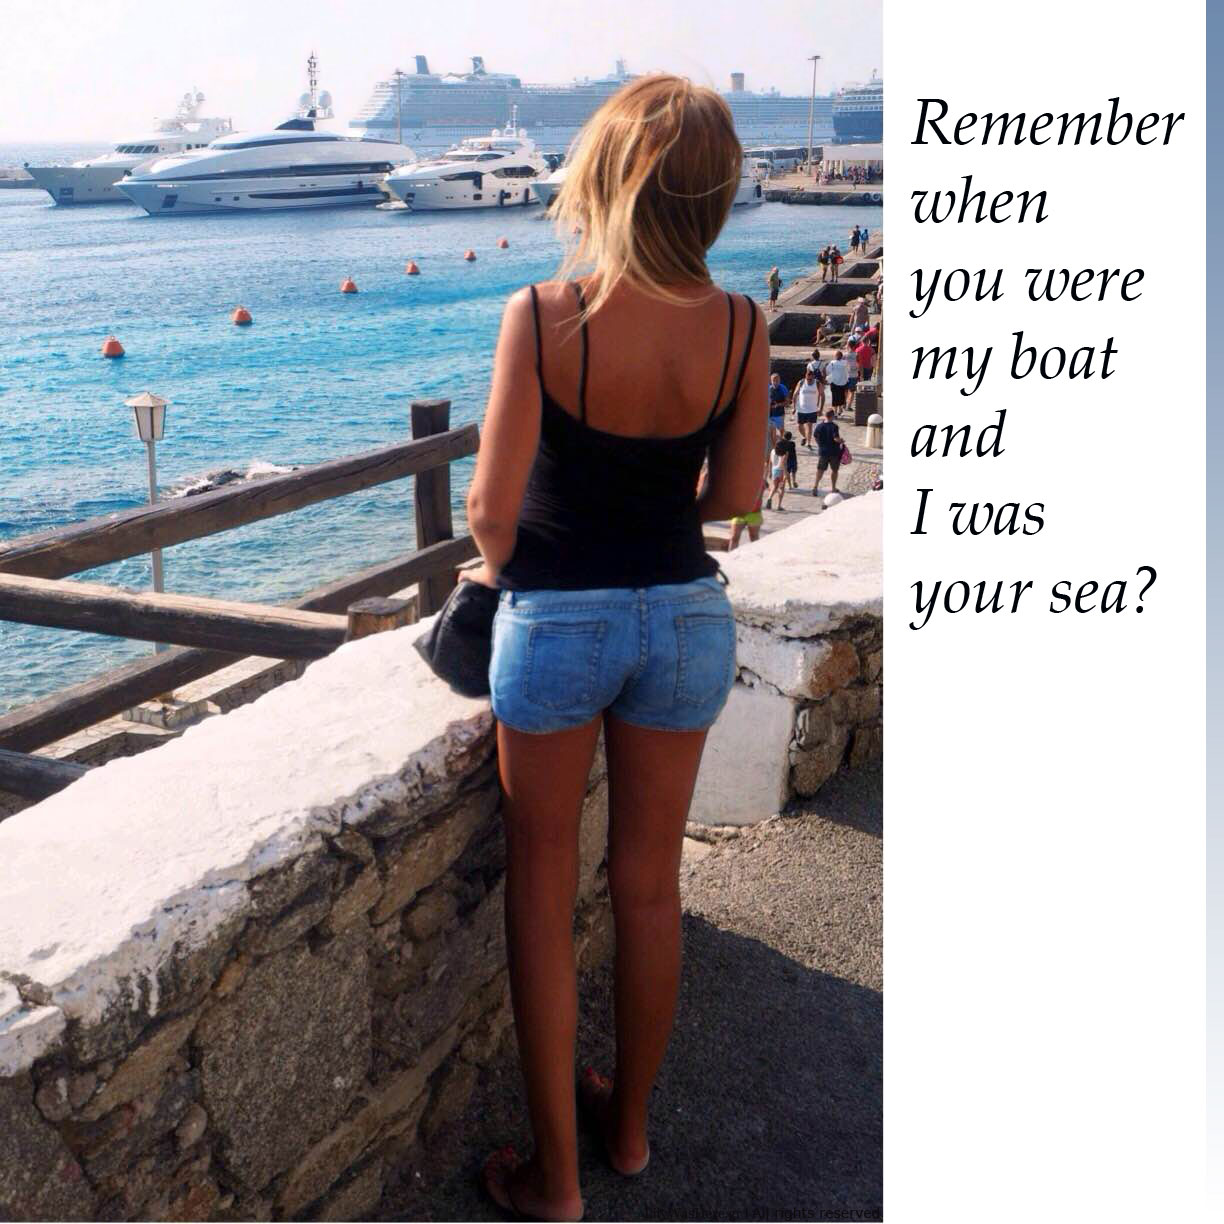 Remember when you were my boat and I was your sea - GReek quote postcard